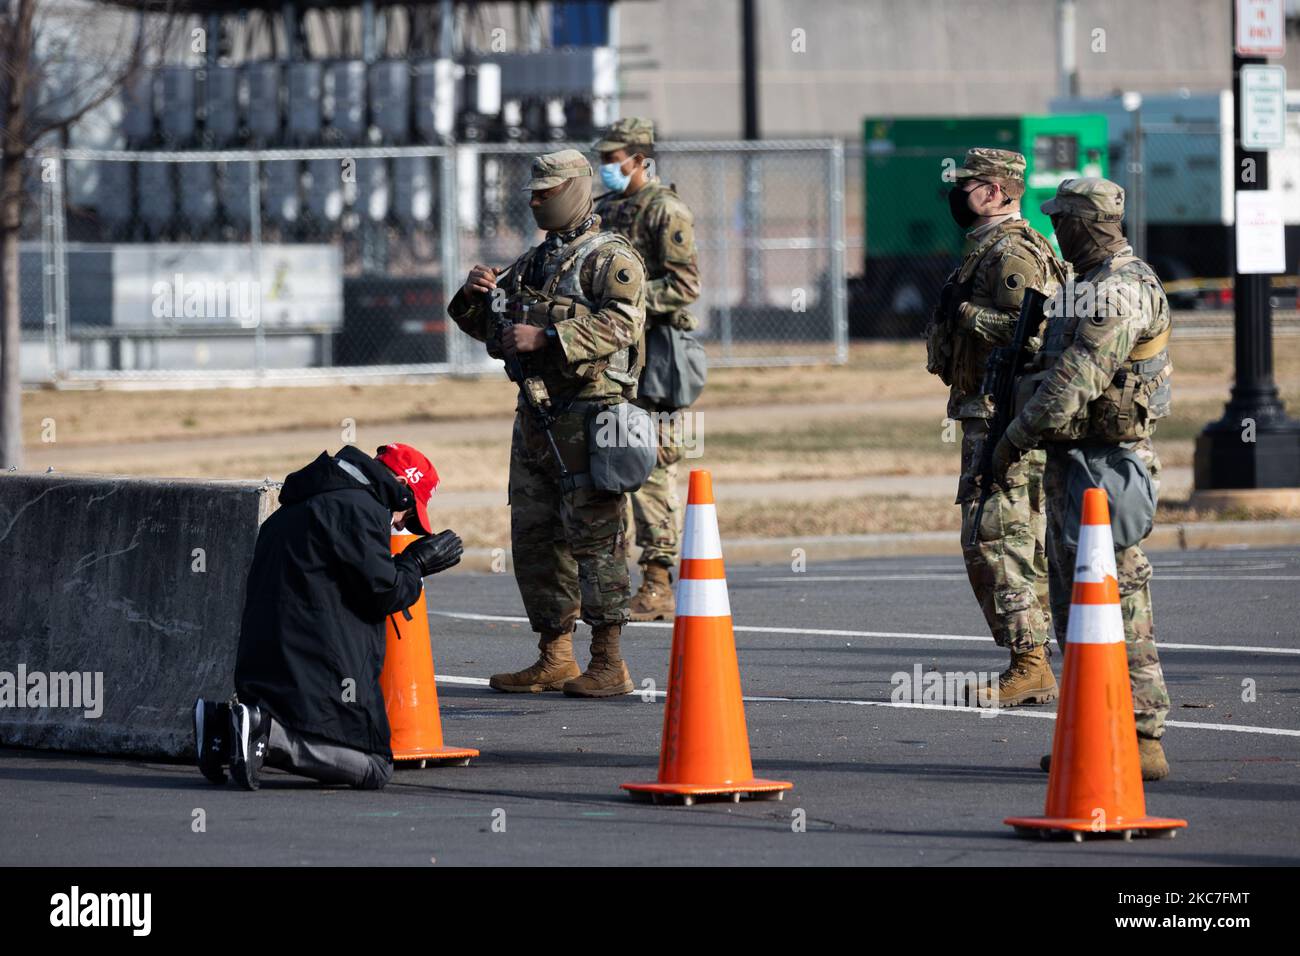 A President Donald Trump supporter wearing a MAGA hat is seen praying in front o Members of The National Guard outside The US Congress. Washington, D.C. January 14, 2021. (Photo by Aurora Samperio/NurPhoto) Stock Photo